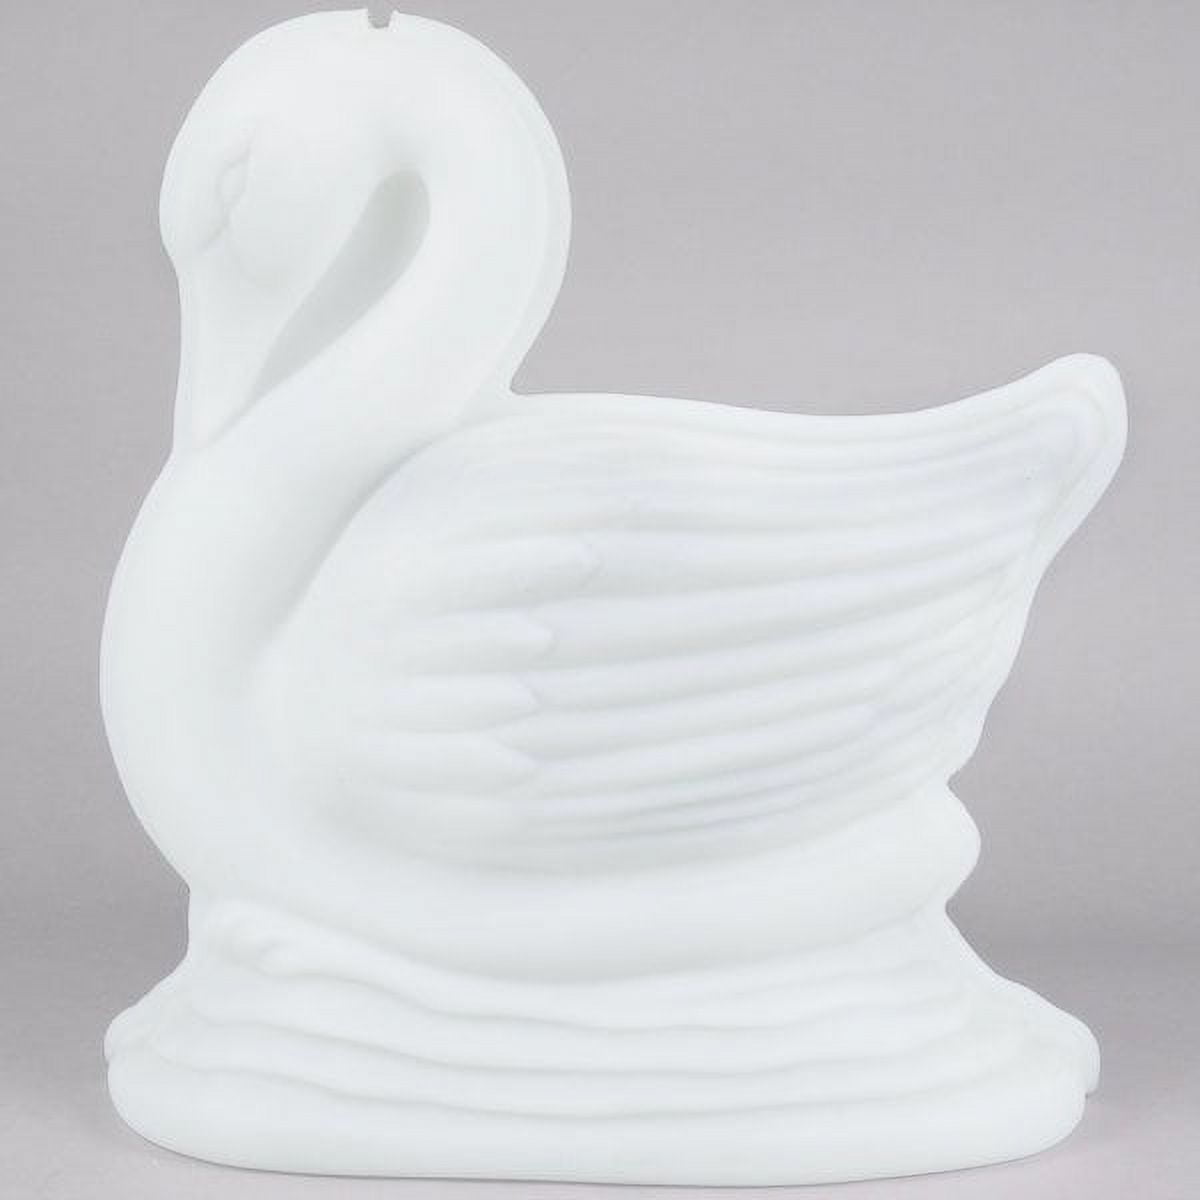 Carlisle Swan Shaped Ice Sculpture Mold For Party/Wedding